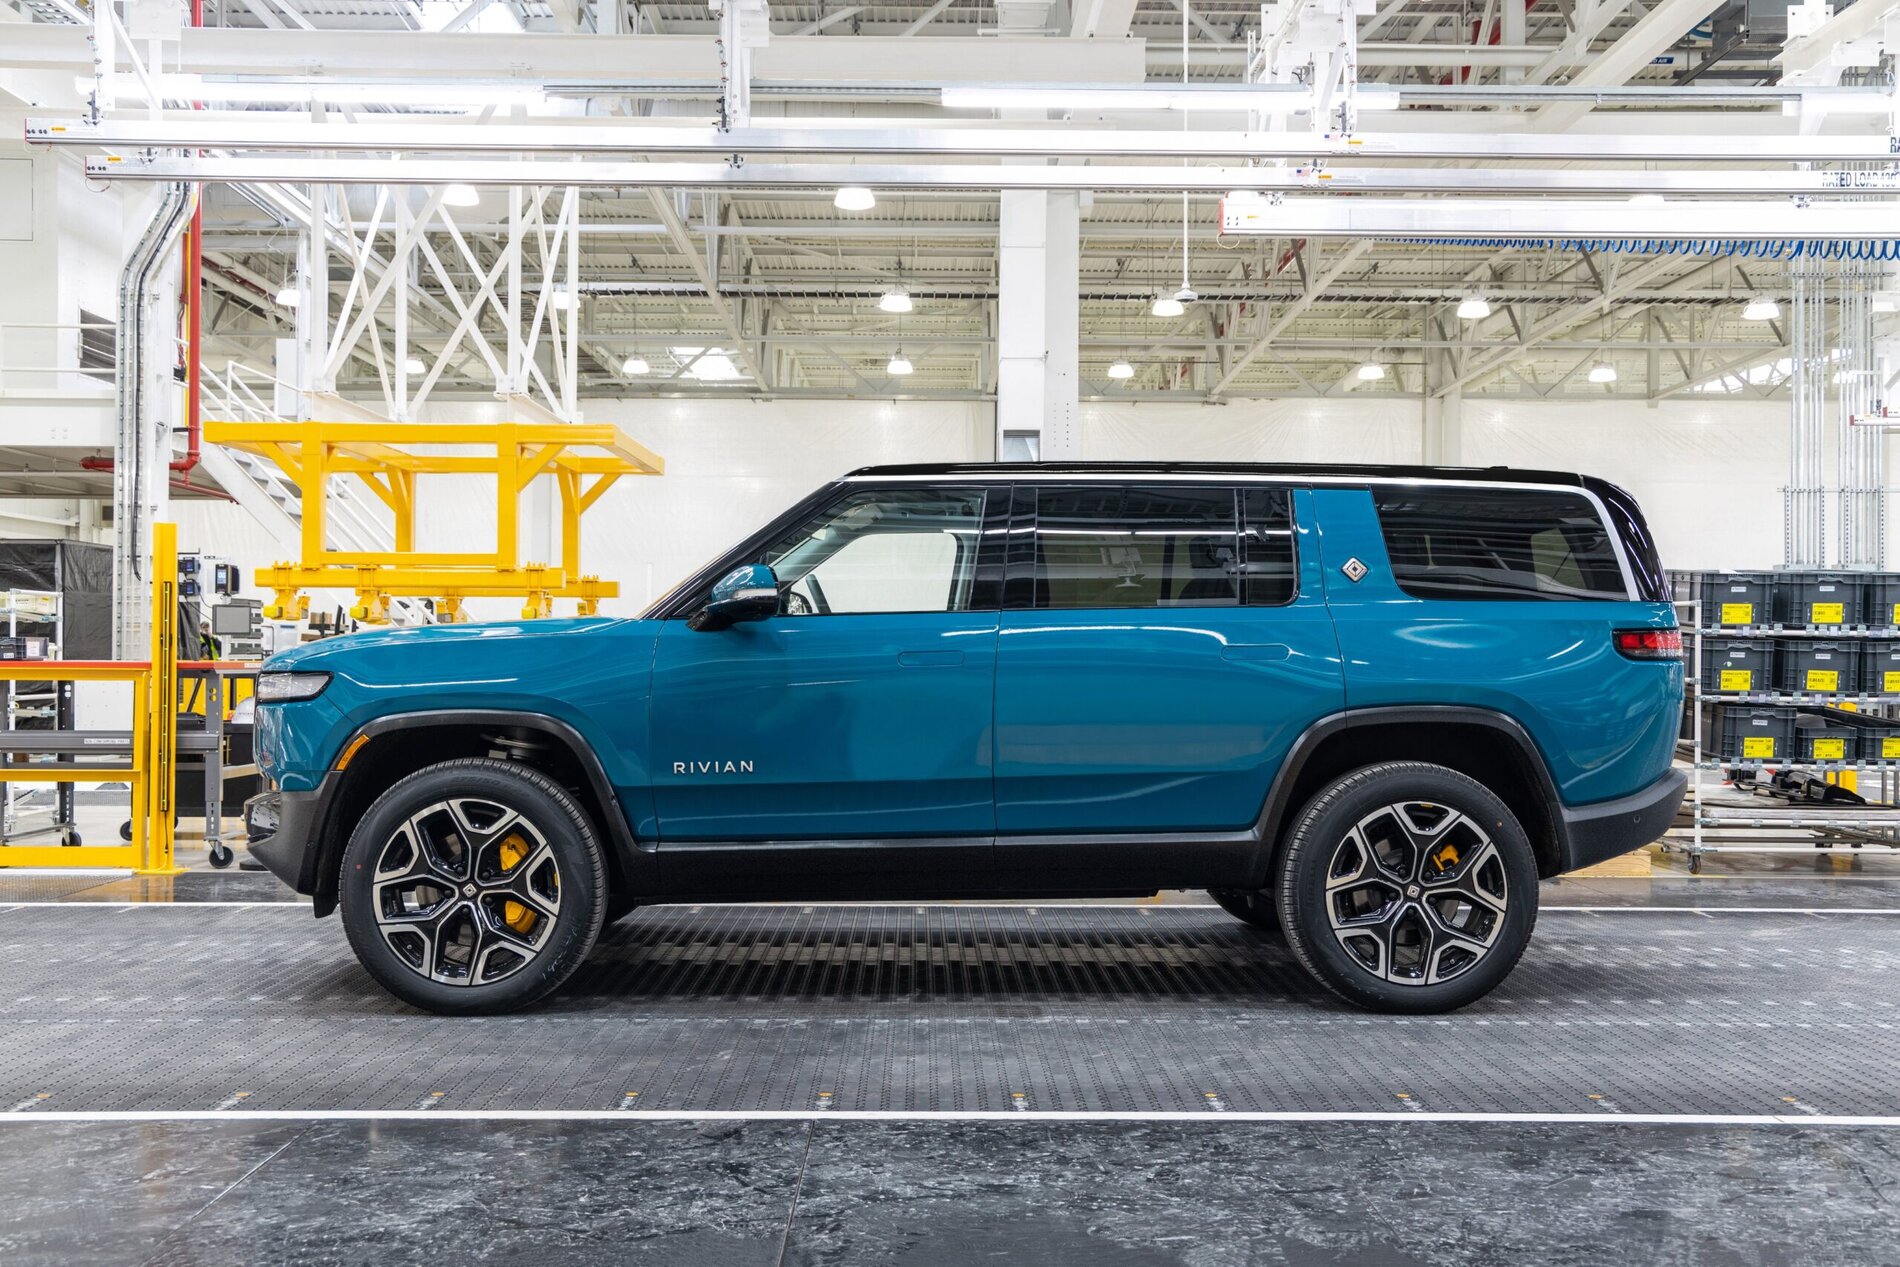 Can't pick an exterior color? Here are some real world photos. Rivian